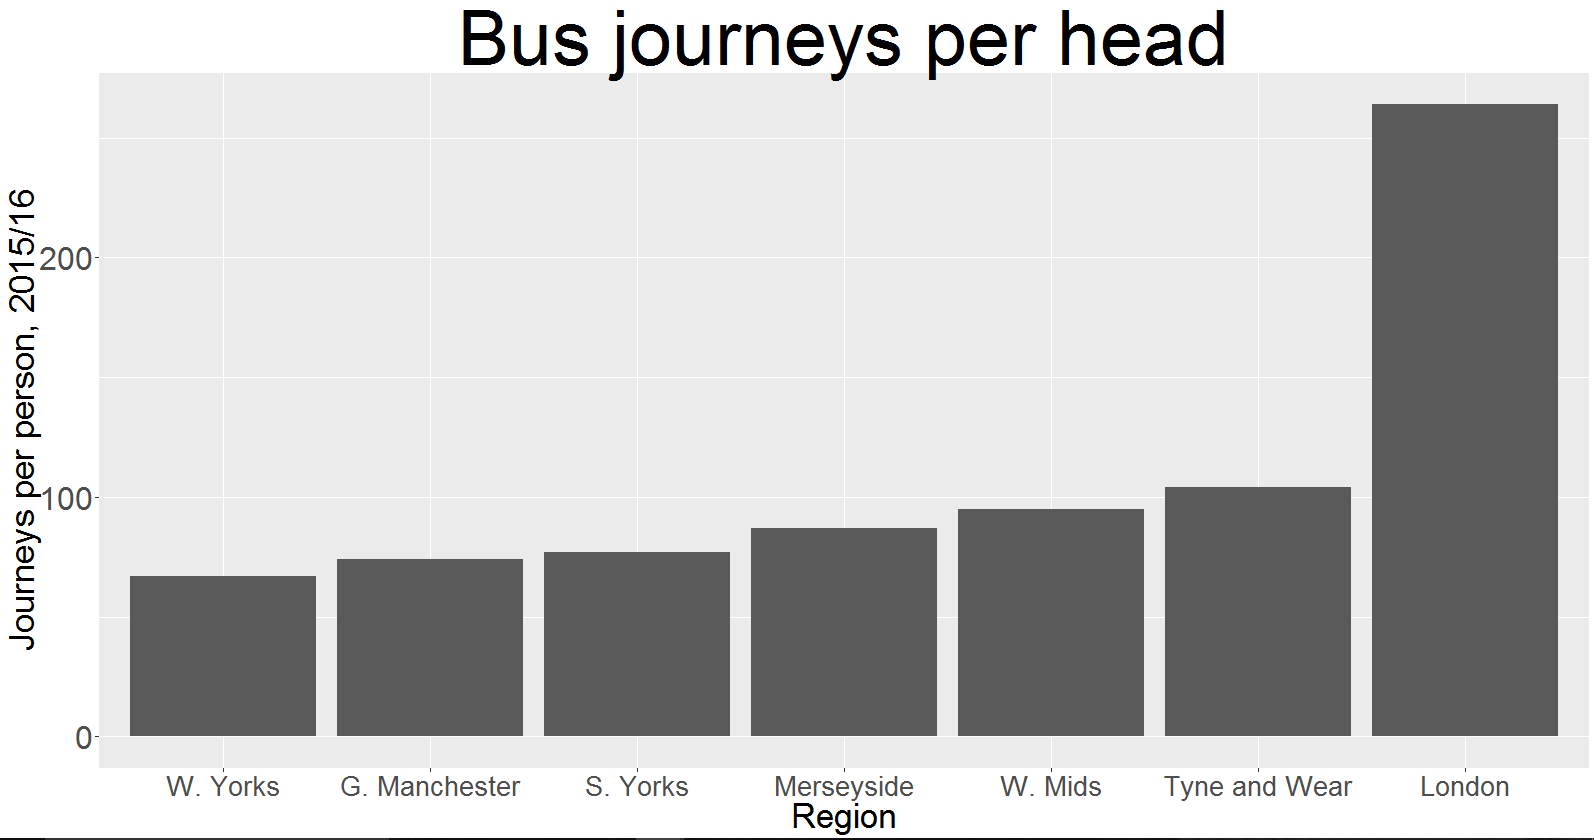 Londoners Take the Bus Far More Often Than the Rest of England (Adjusted for Population)